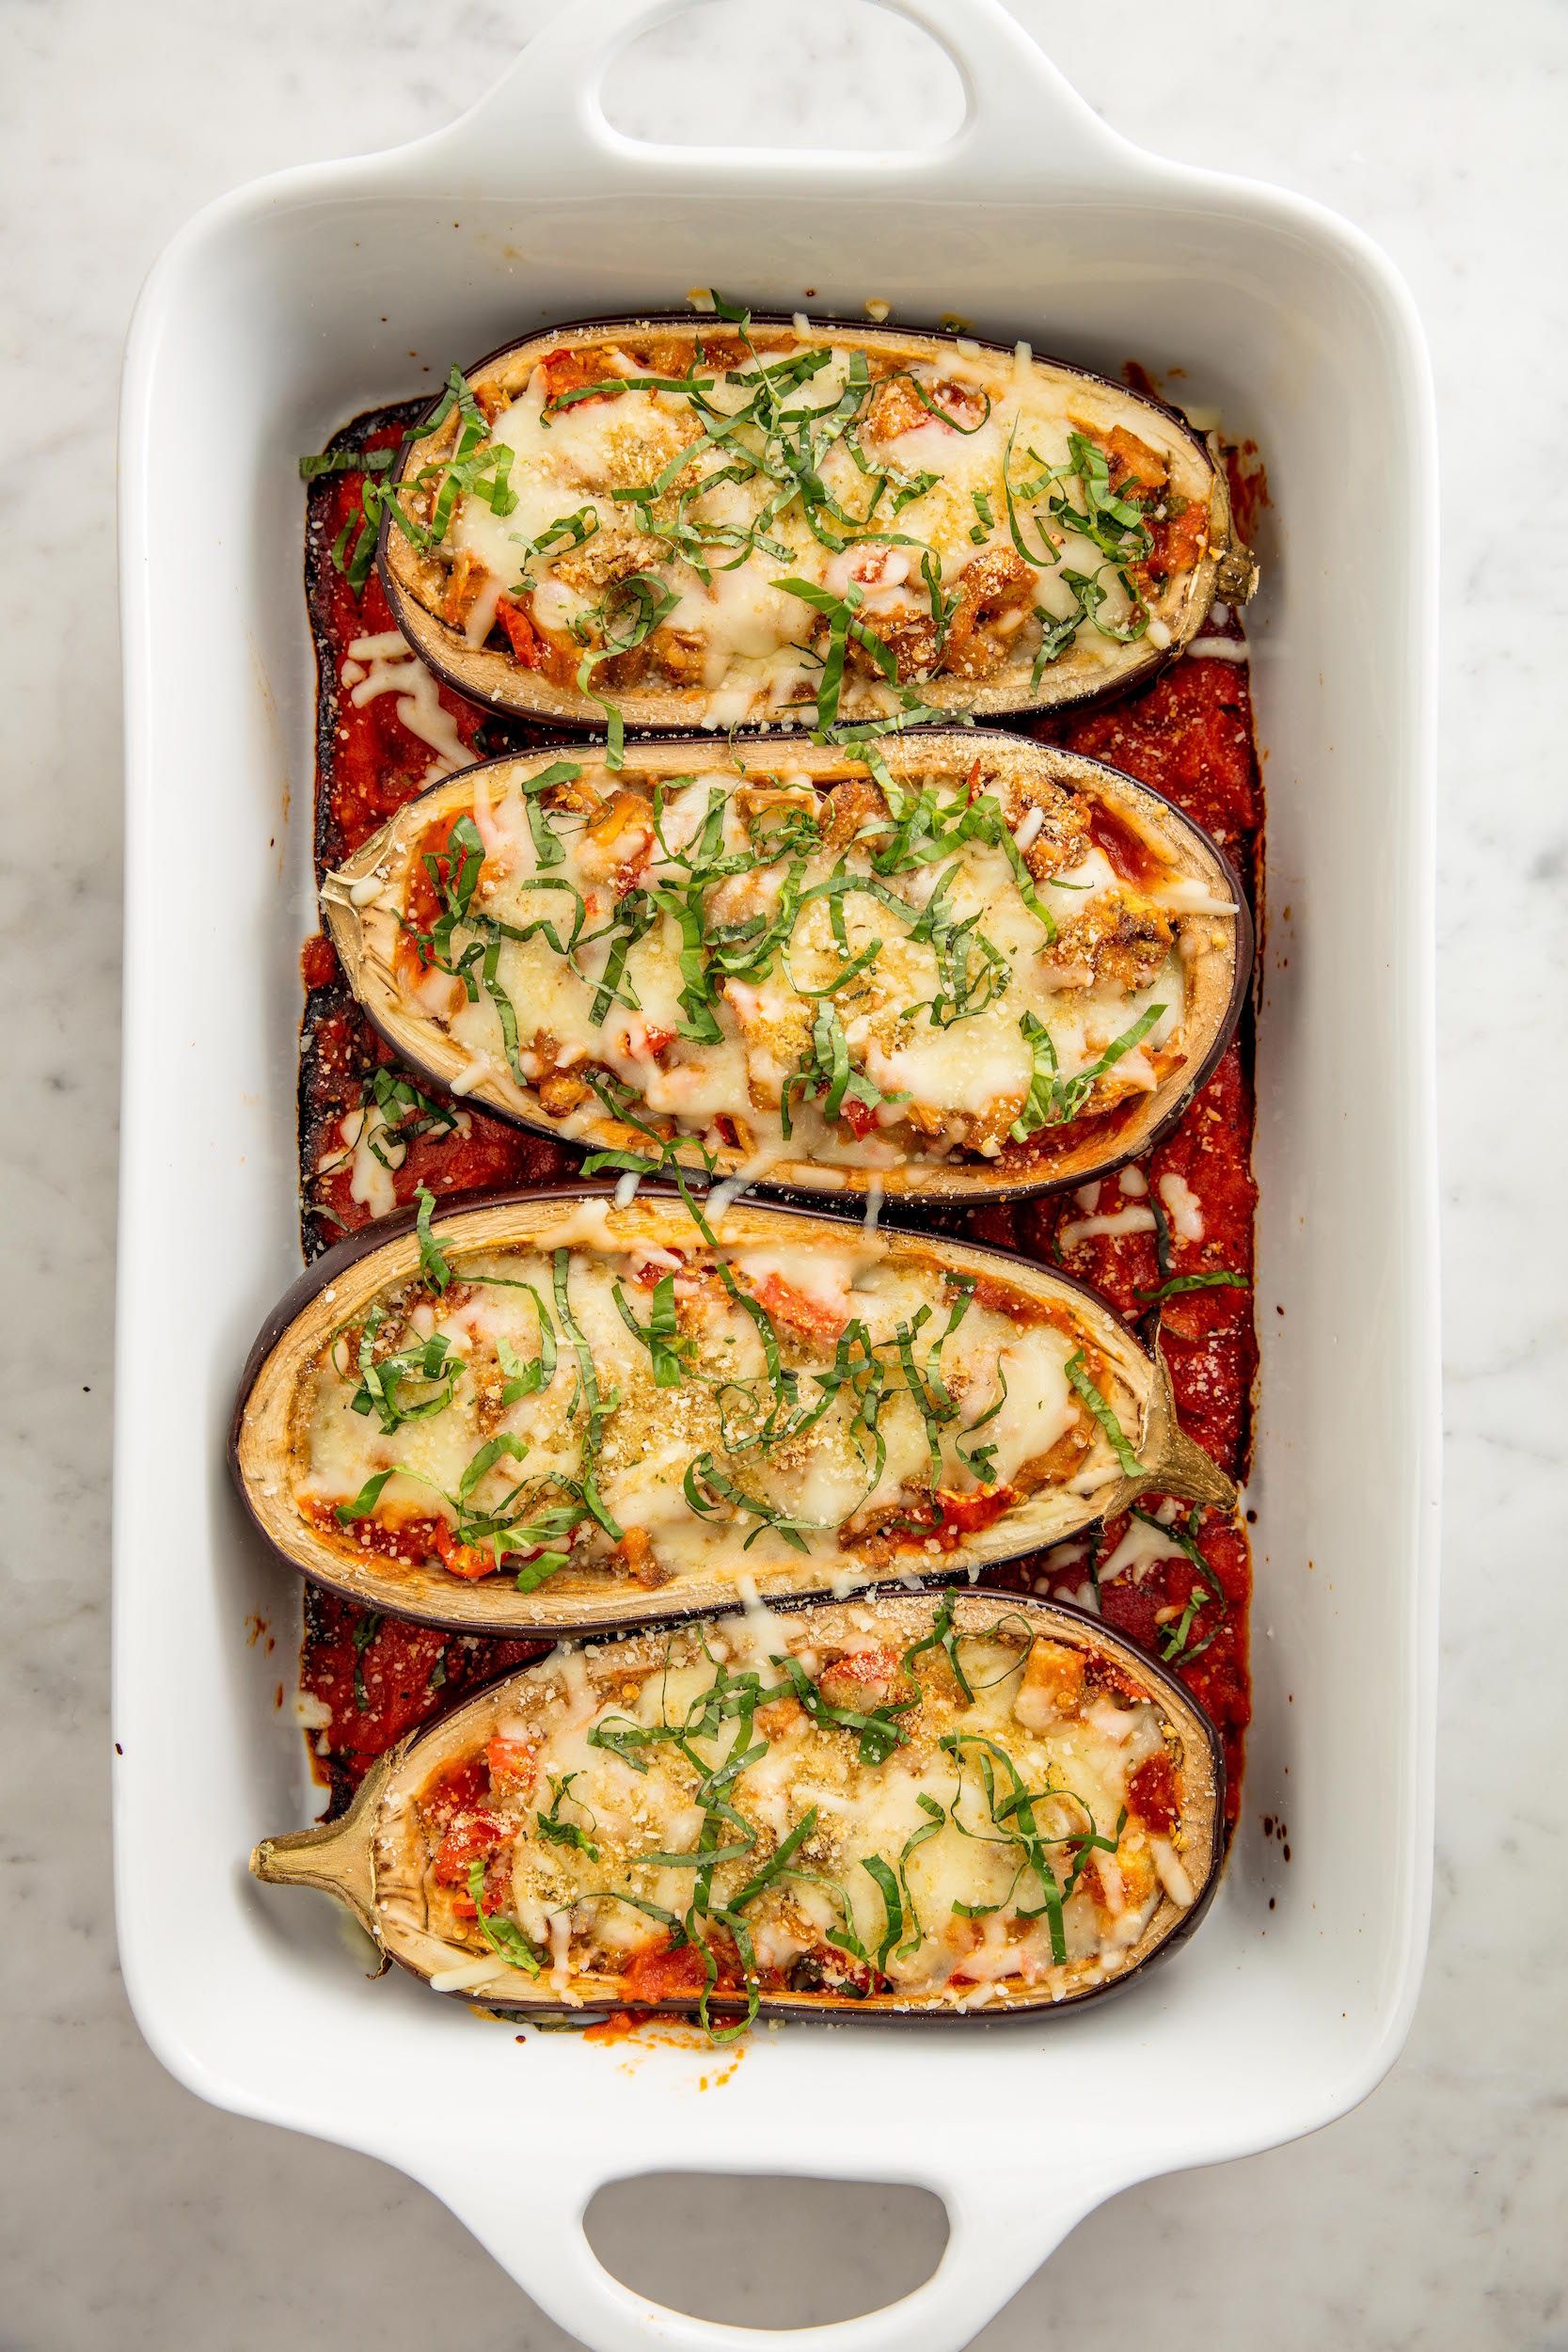 Best Stuffed Eggplant Parm Recipe - How to Make Stuffed Eggplant Parm